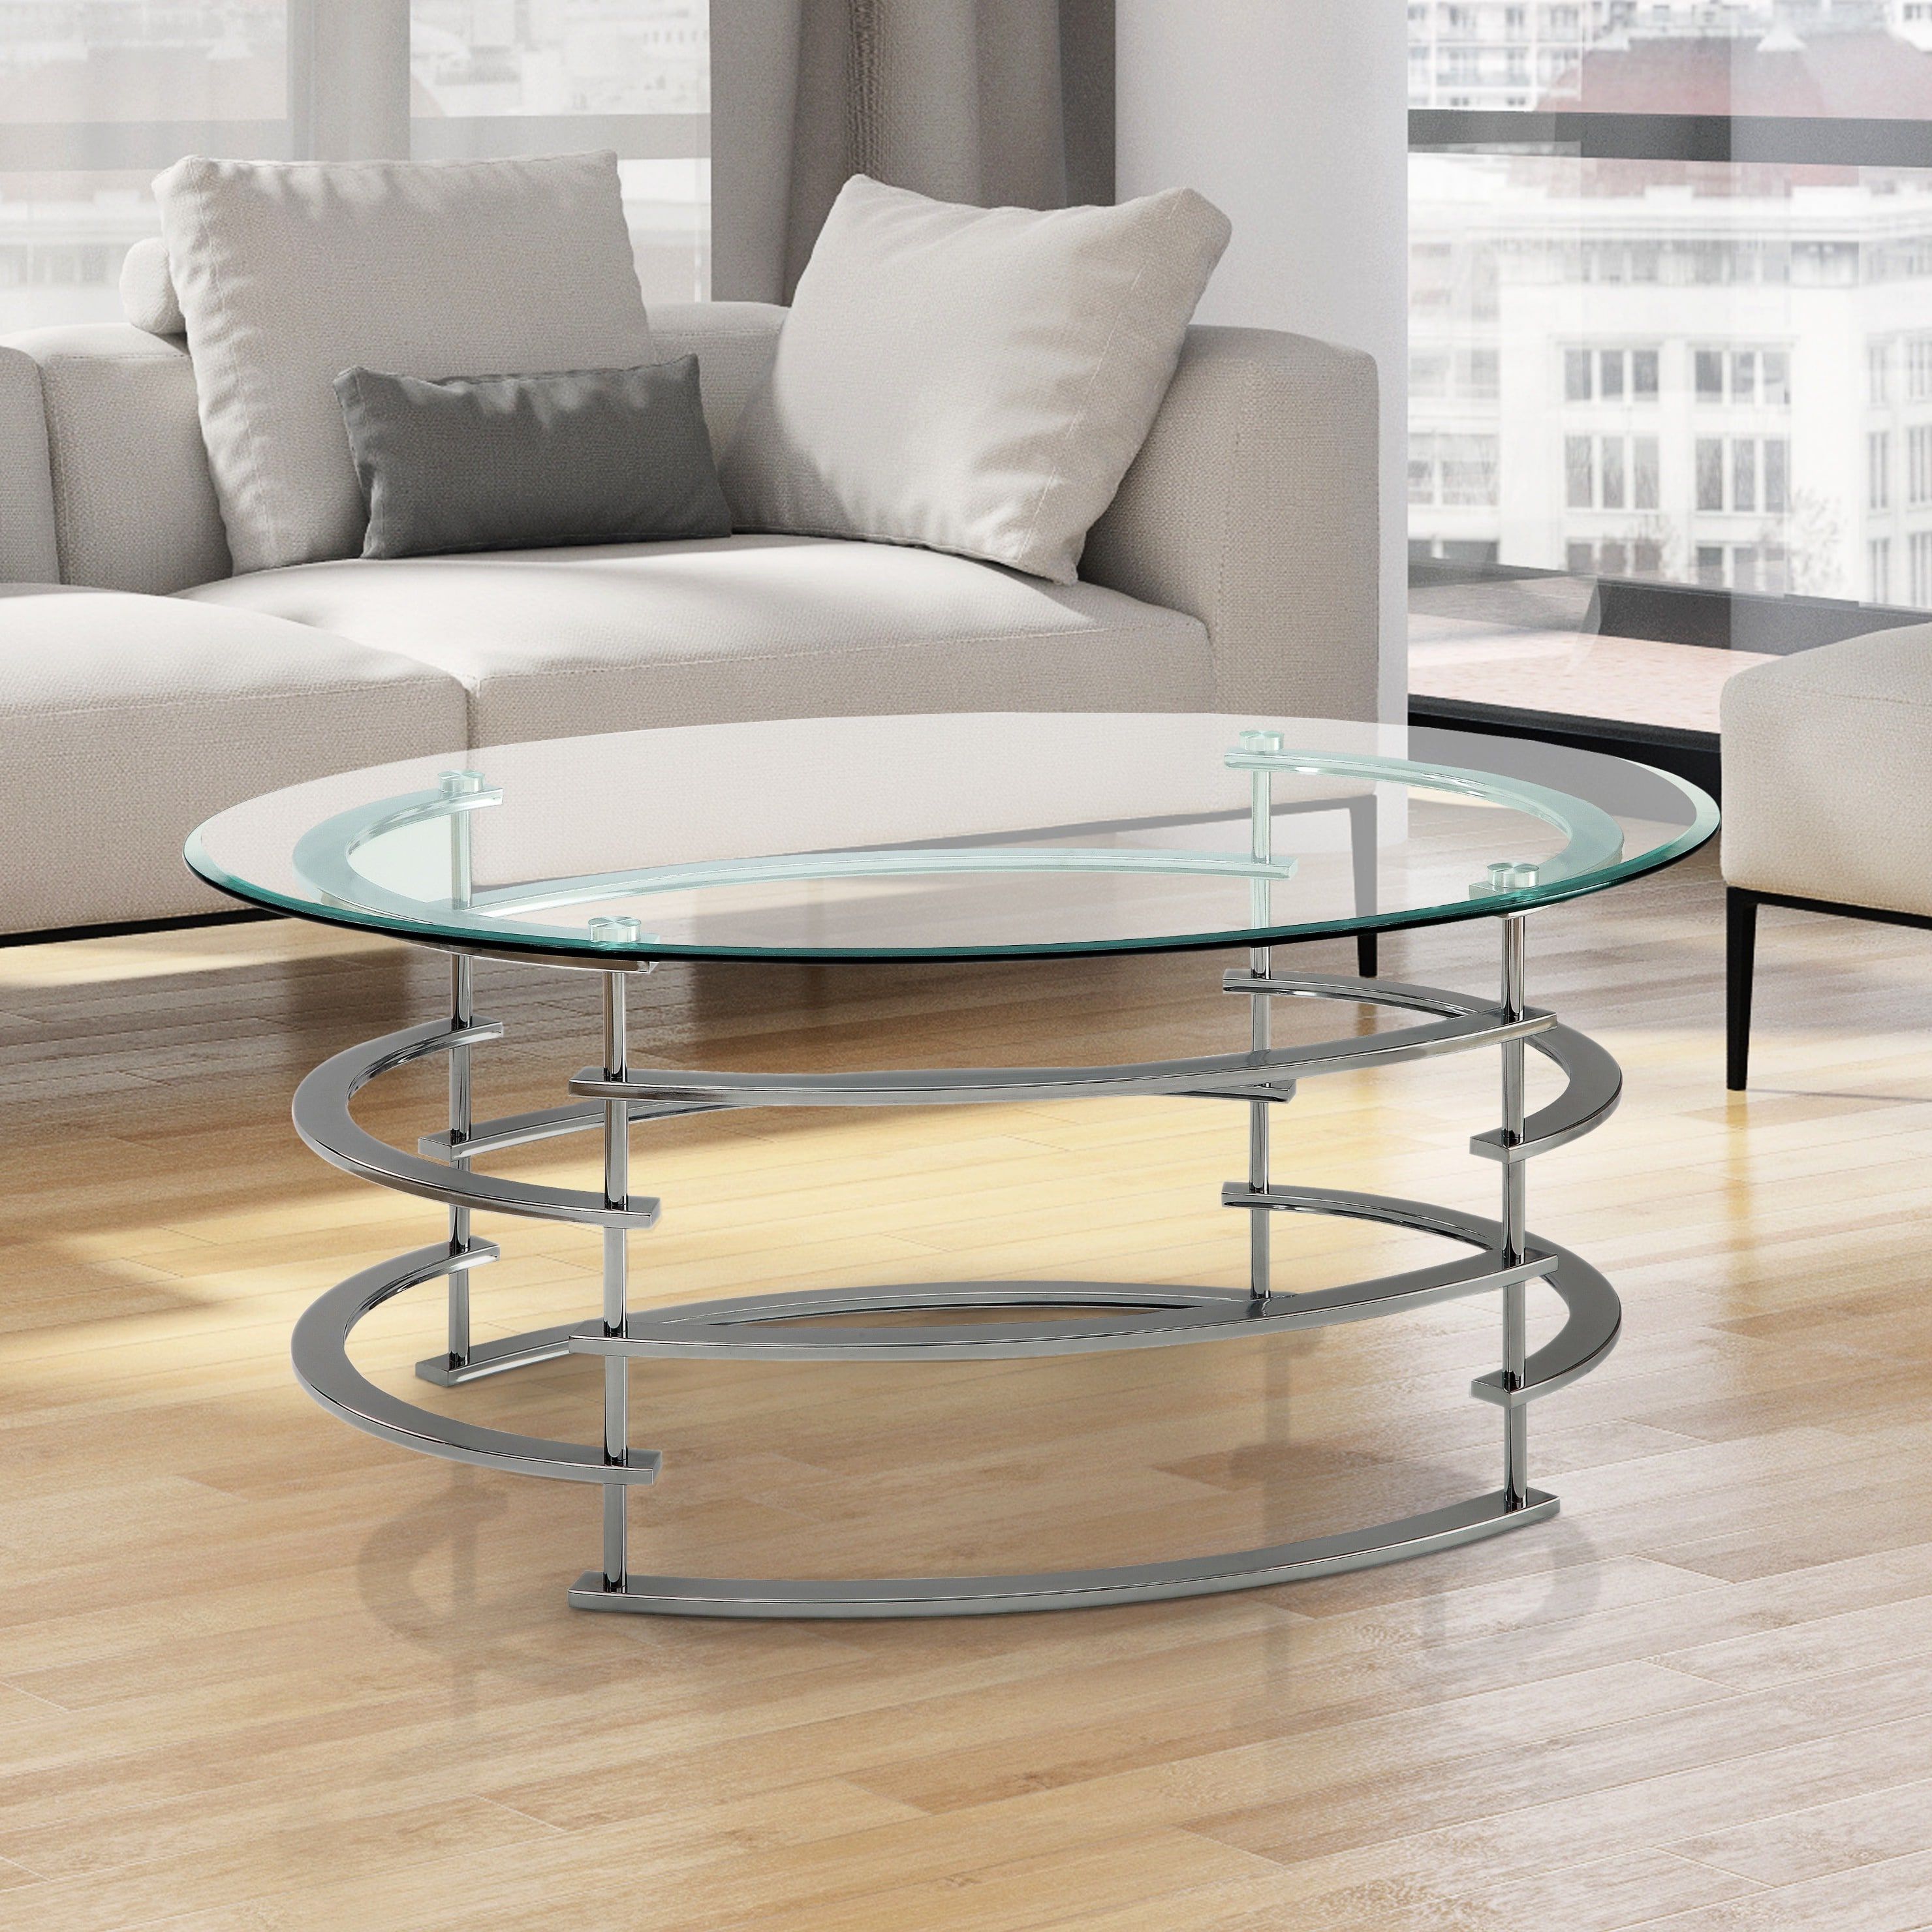 Popular Silver Orchid Ipsen Contemporary Glass Top Coffee Tables In Silver Orchid Marcello Contemporary Glass Top Coffee Table (View 8 of 20)